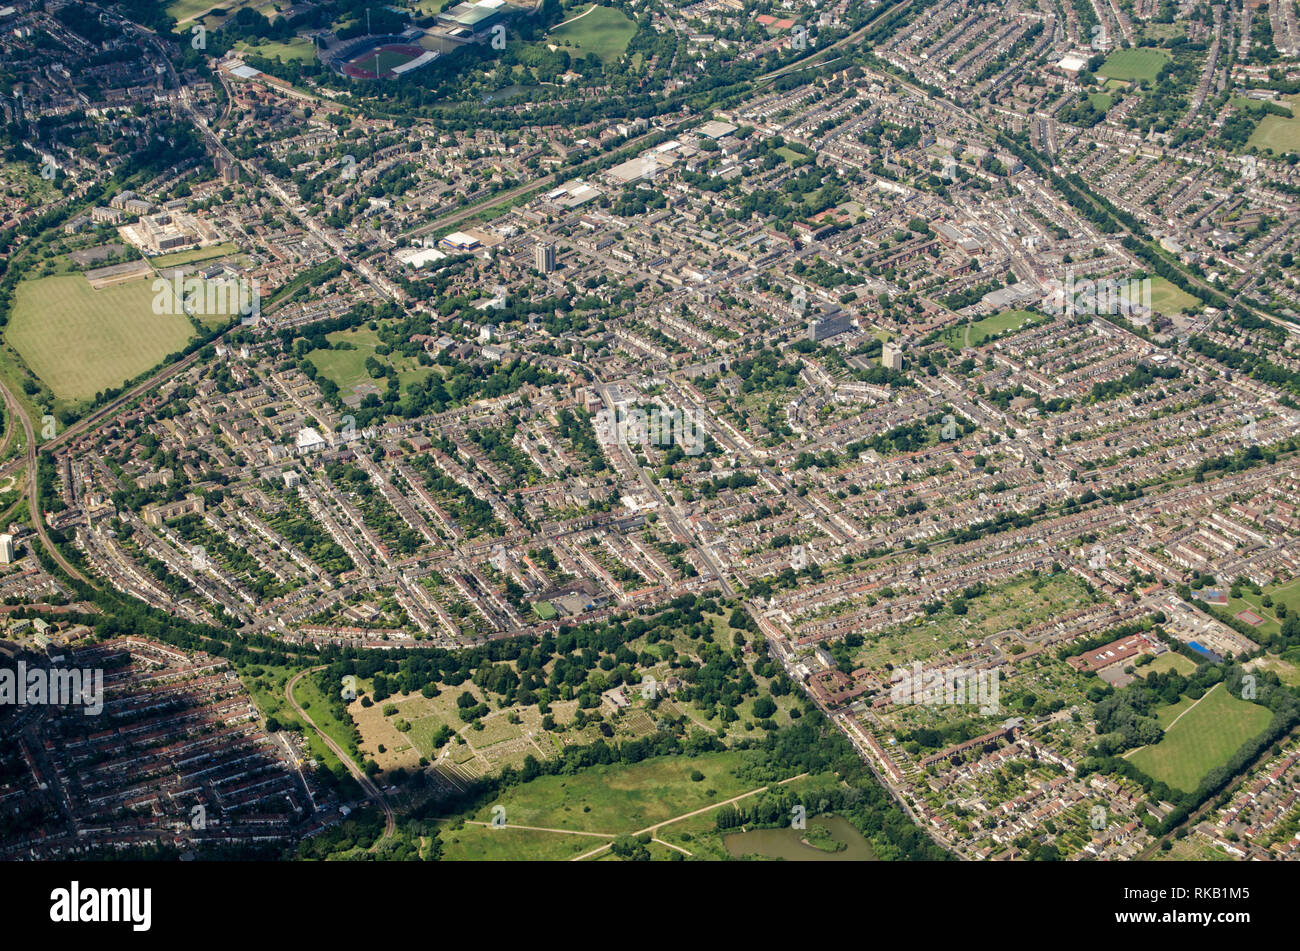 Aerial view of the South London districts of Anerley, Penge and Betts Park with South Norwood Country Park at the very bottom of the image. Stock Photo